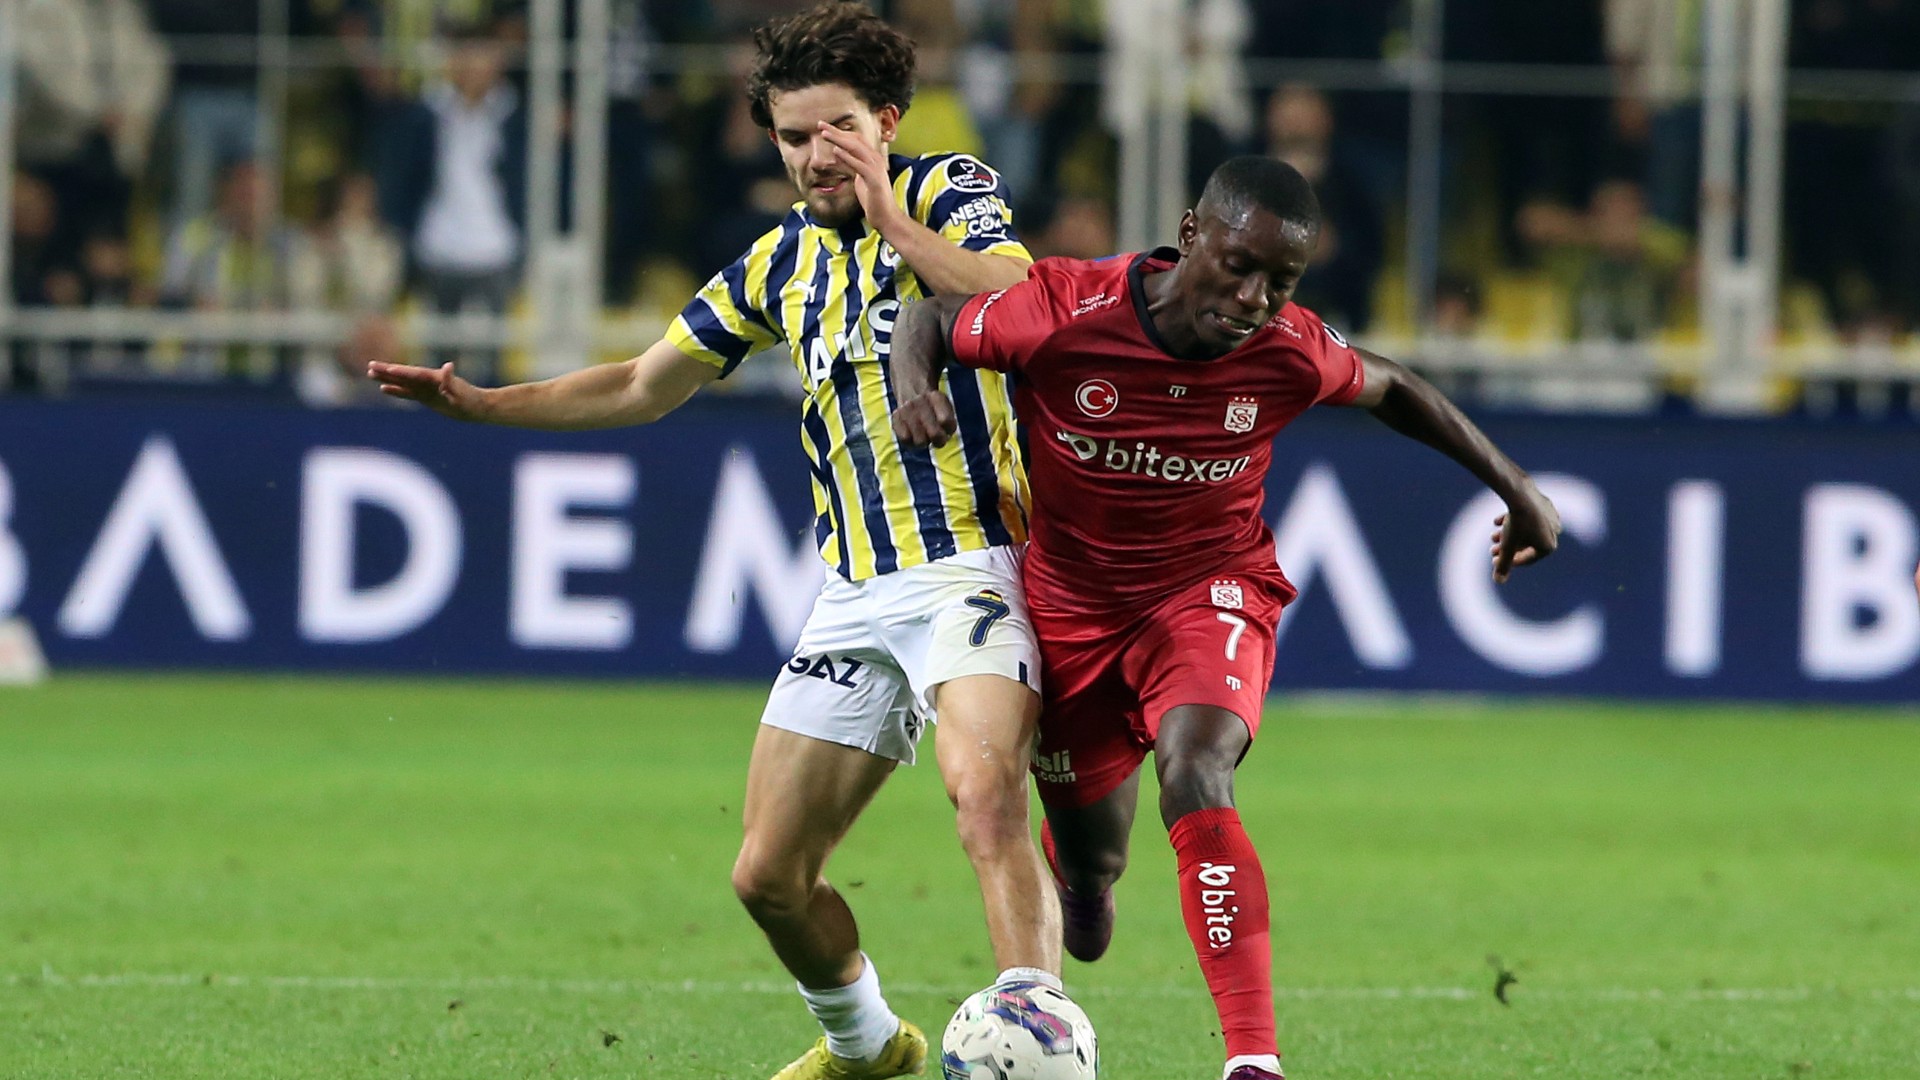 The Fenerbahçe - Istanbul Rivalry: A Battle for Turkish Football Supremacy